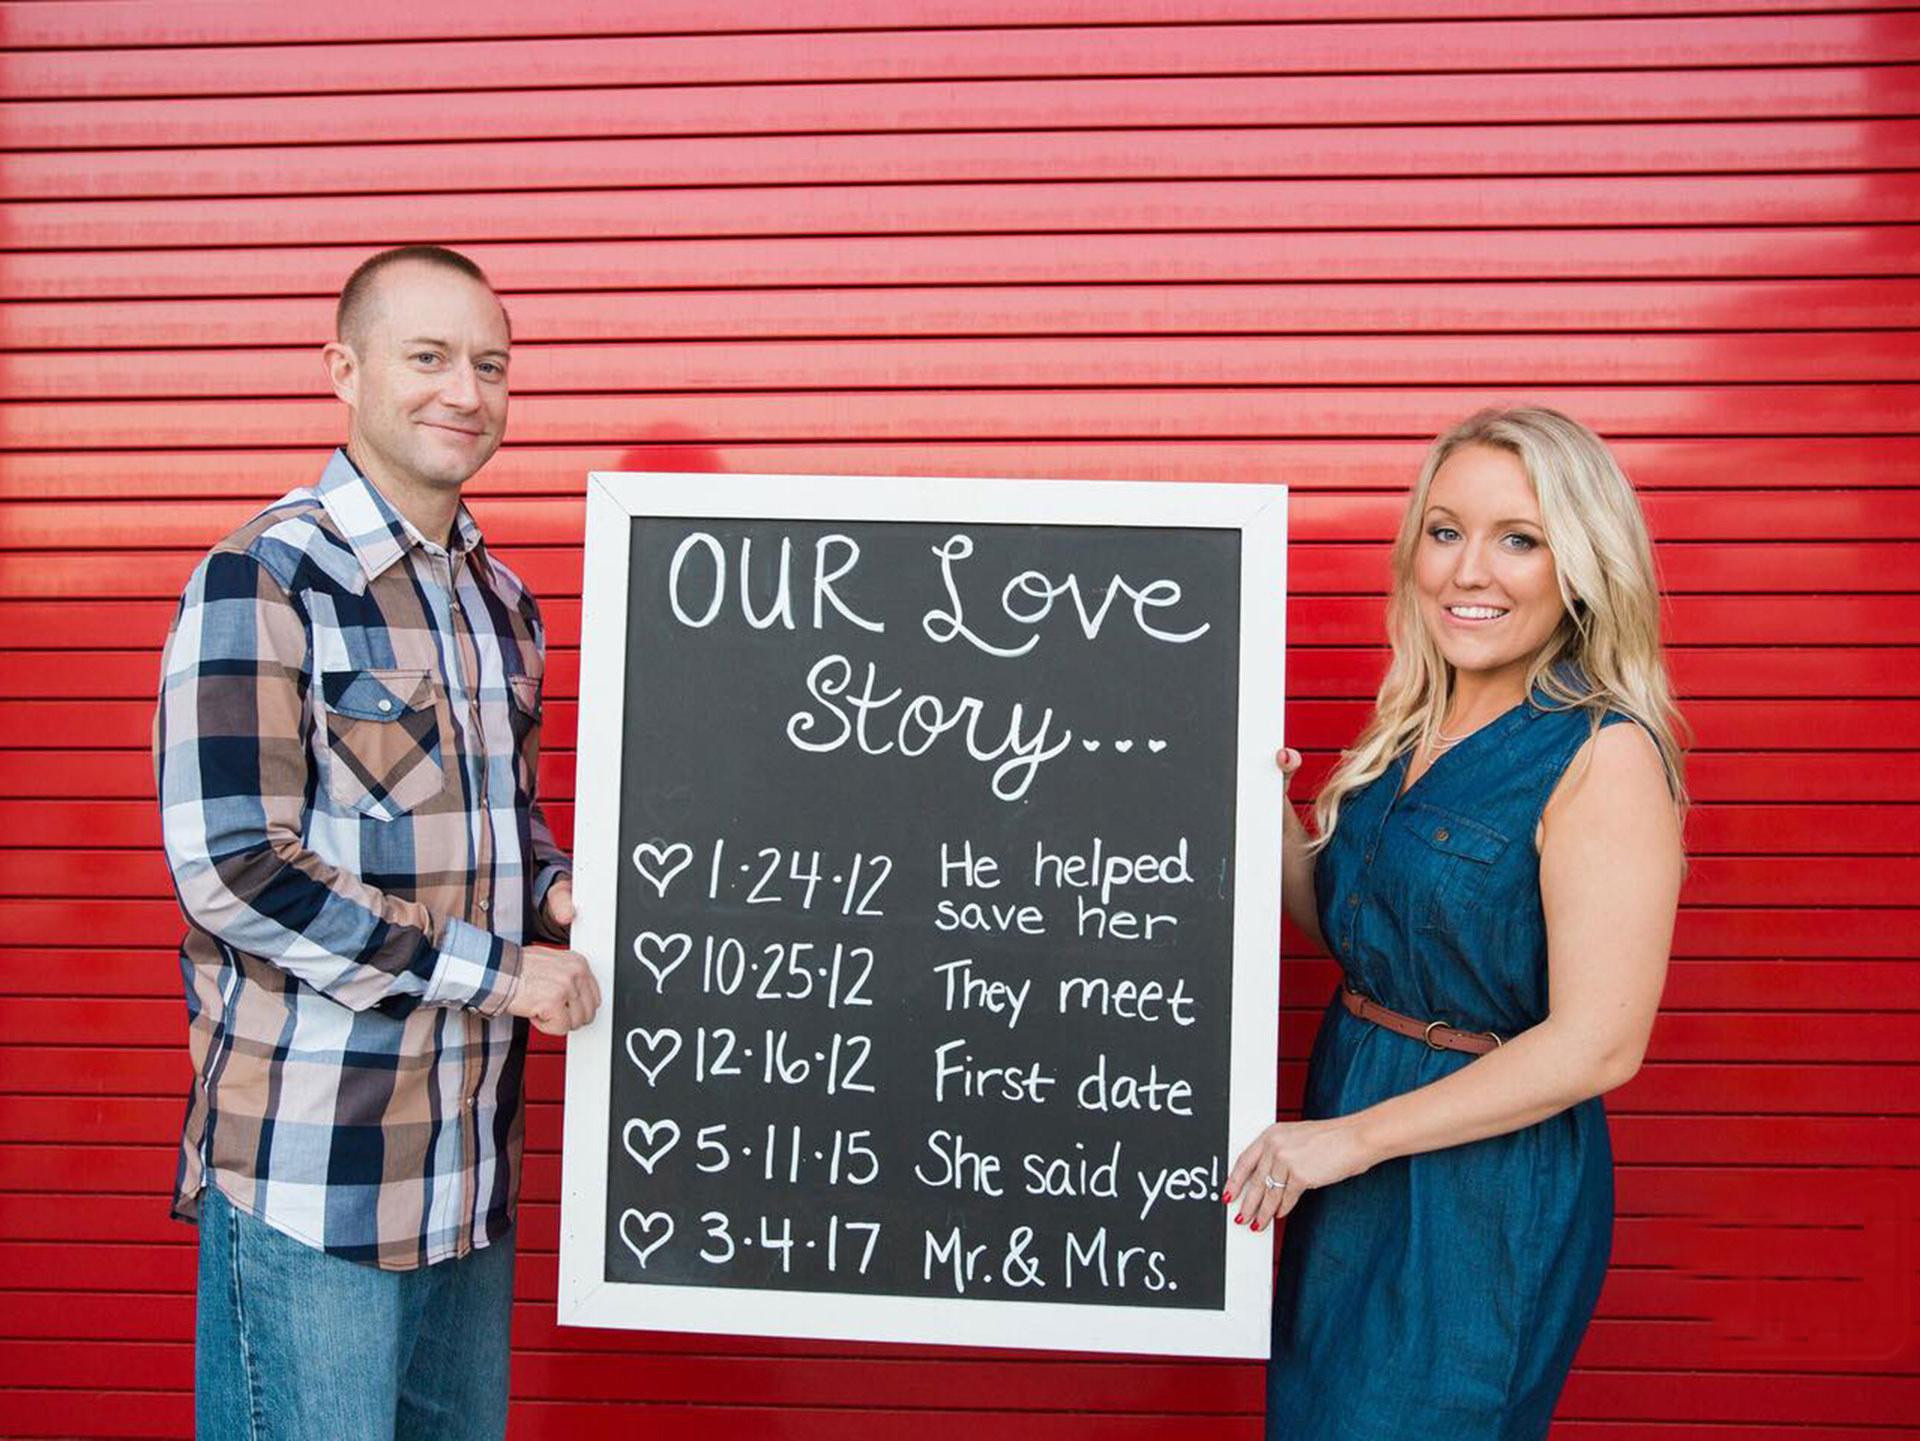 Melissa Dohme to marry Cameron Hill, man who saved her life